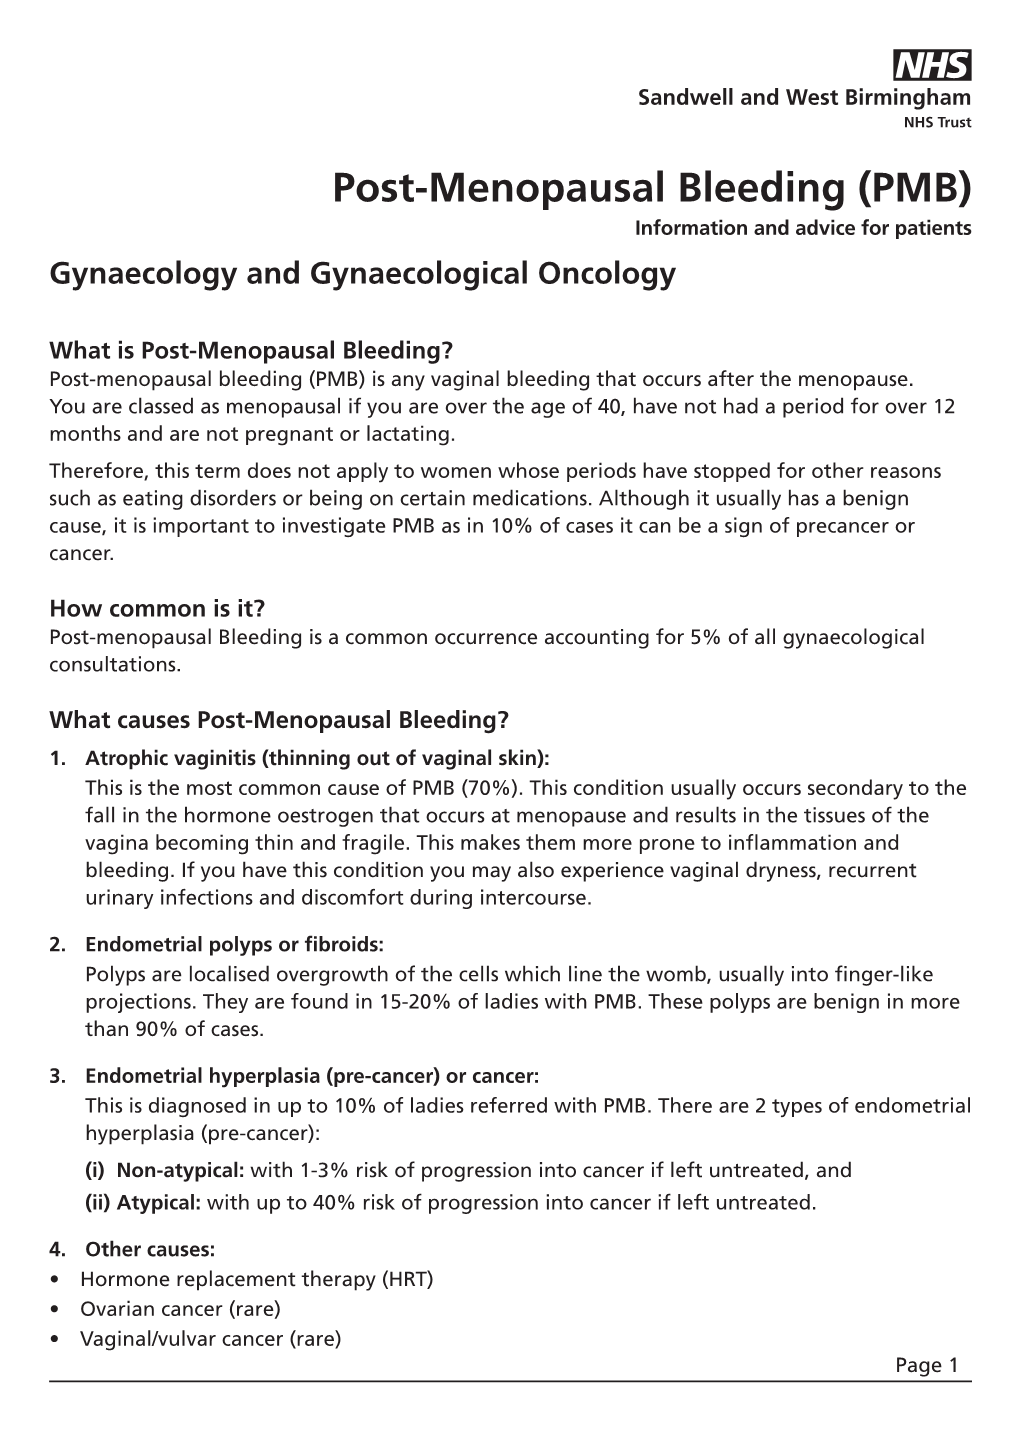 Post-Menopausal Bleeding (PMB) Information and Advice for Patients Gynaecology and Gynaecological Oncology